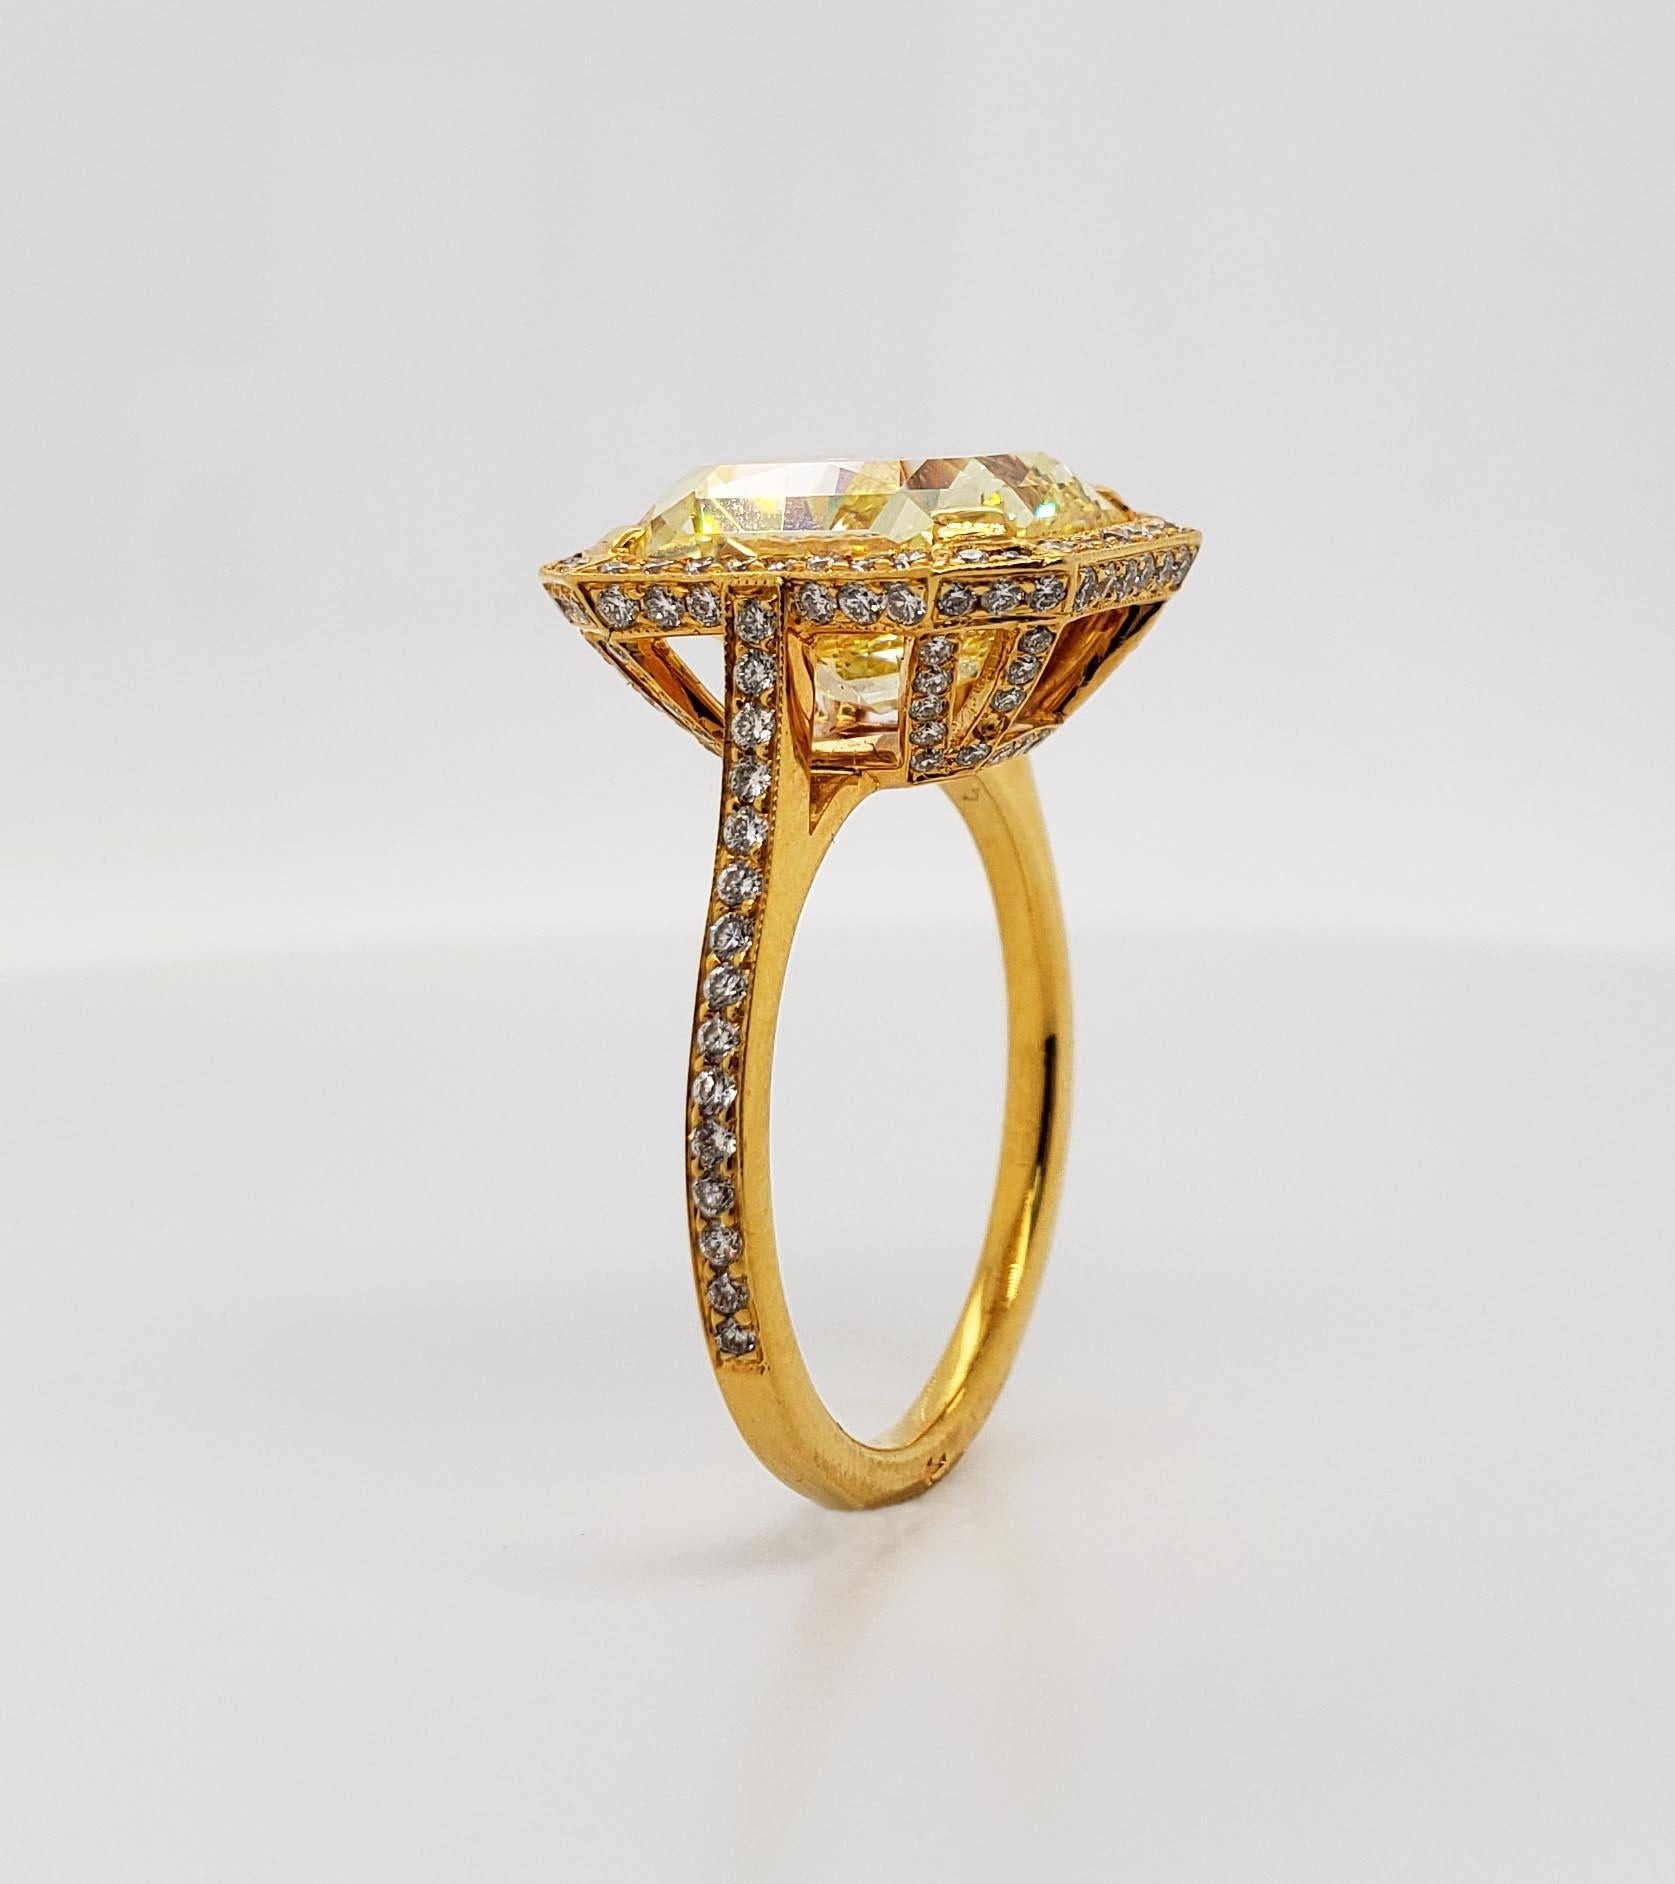 From SCARSELLI, a simply important ring featuring a 6.70 carat Fancy Vivid Yellow Radiant cut diamond (GIA VS2) surrounded by 0.44 carats of small white diamonds in a coordinating handmade mounting of 18 karat yellow gold.
Vivid yellow diamonds of